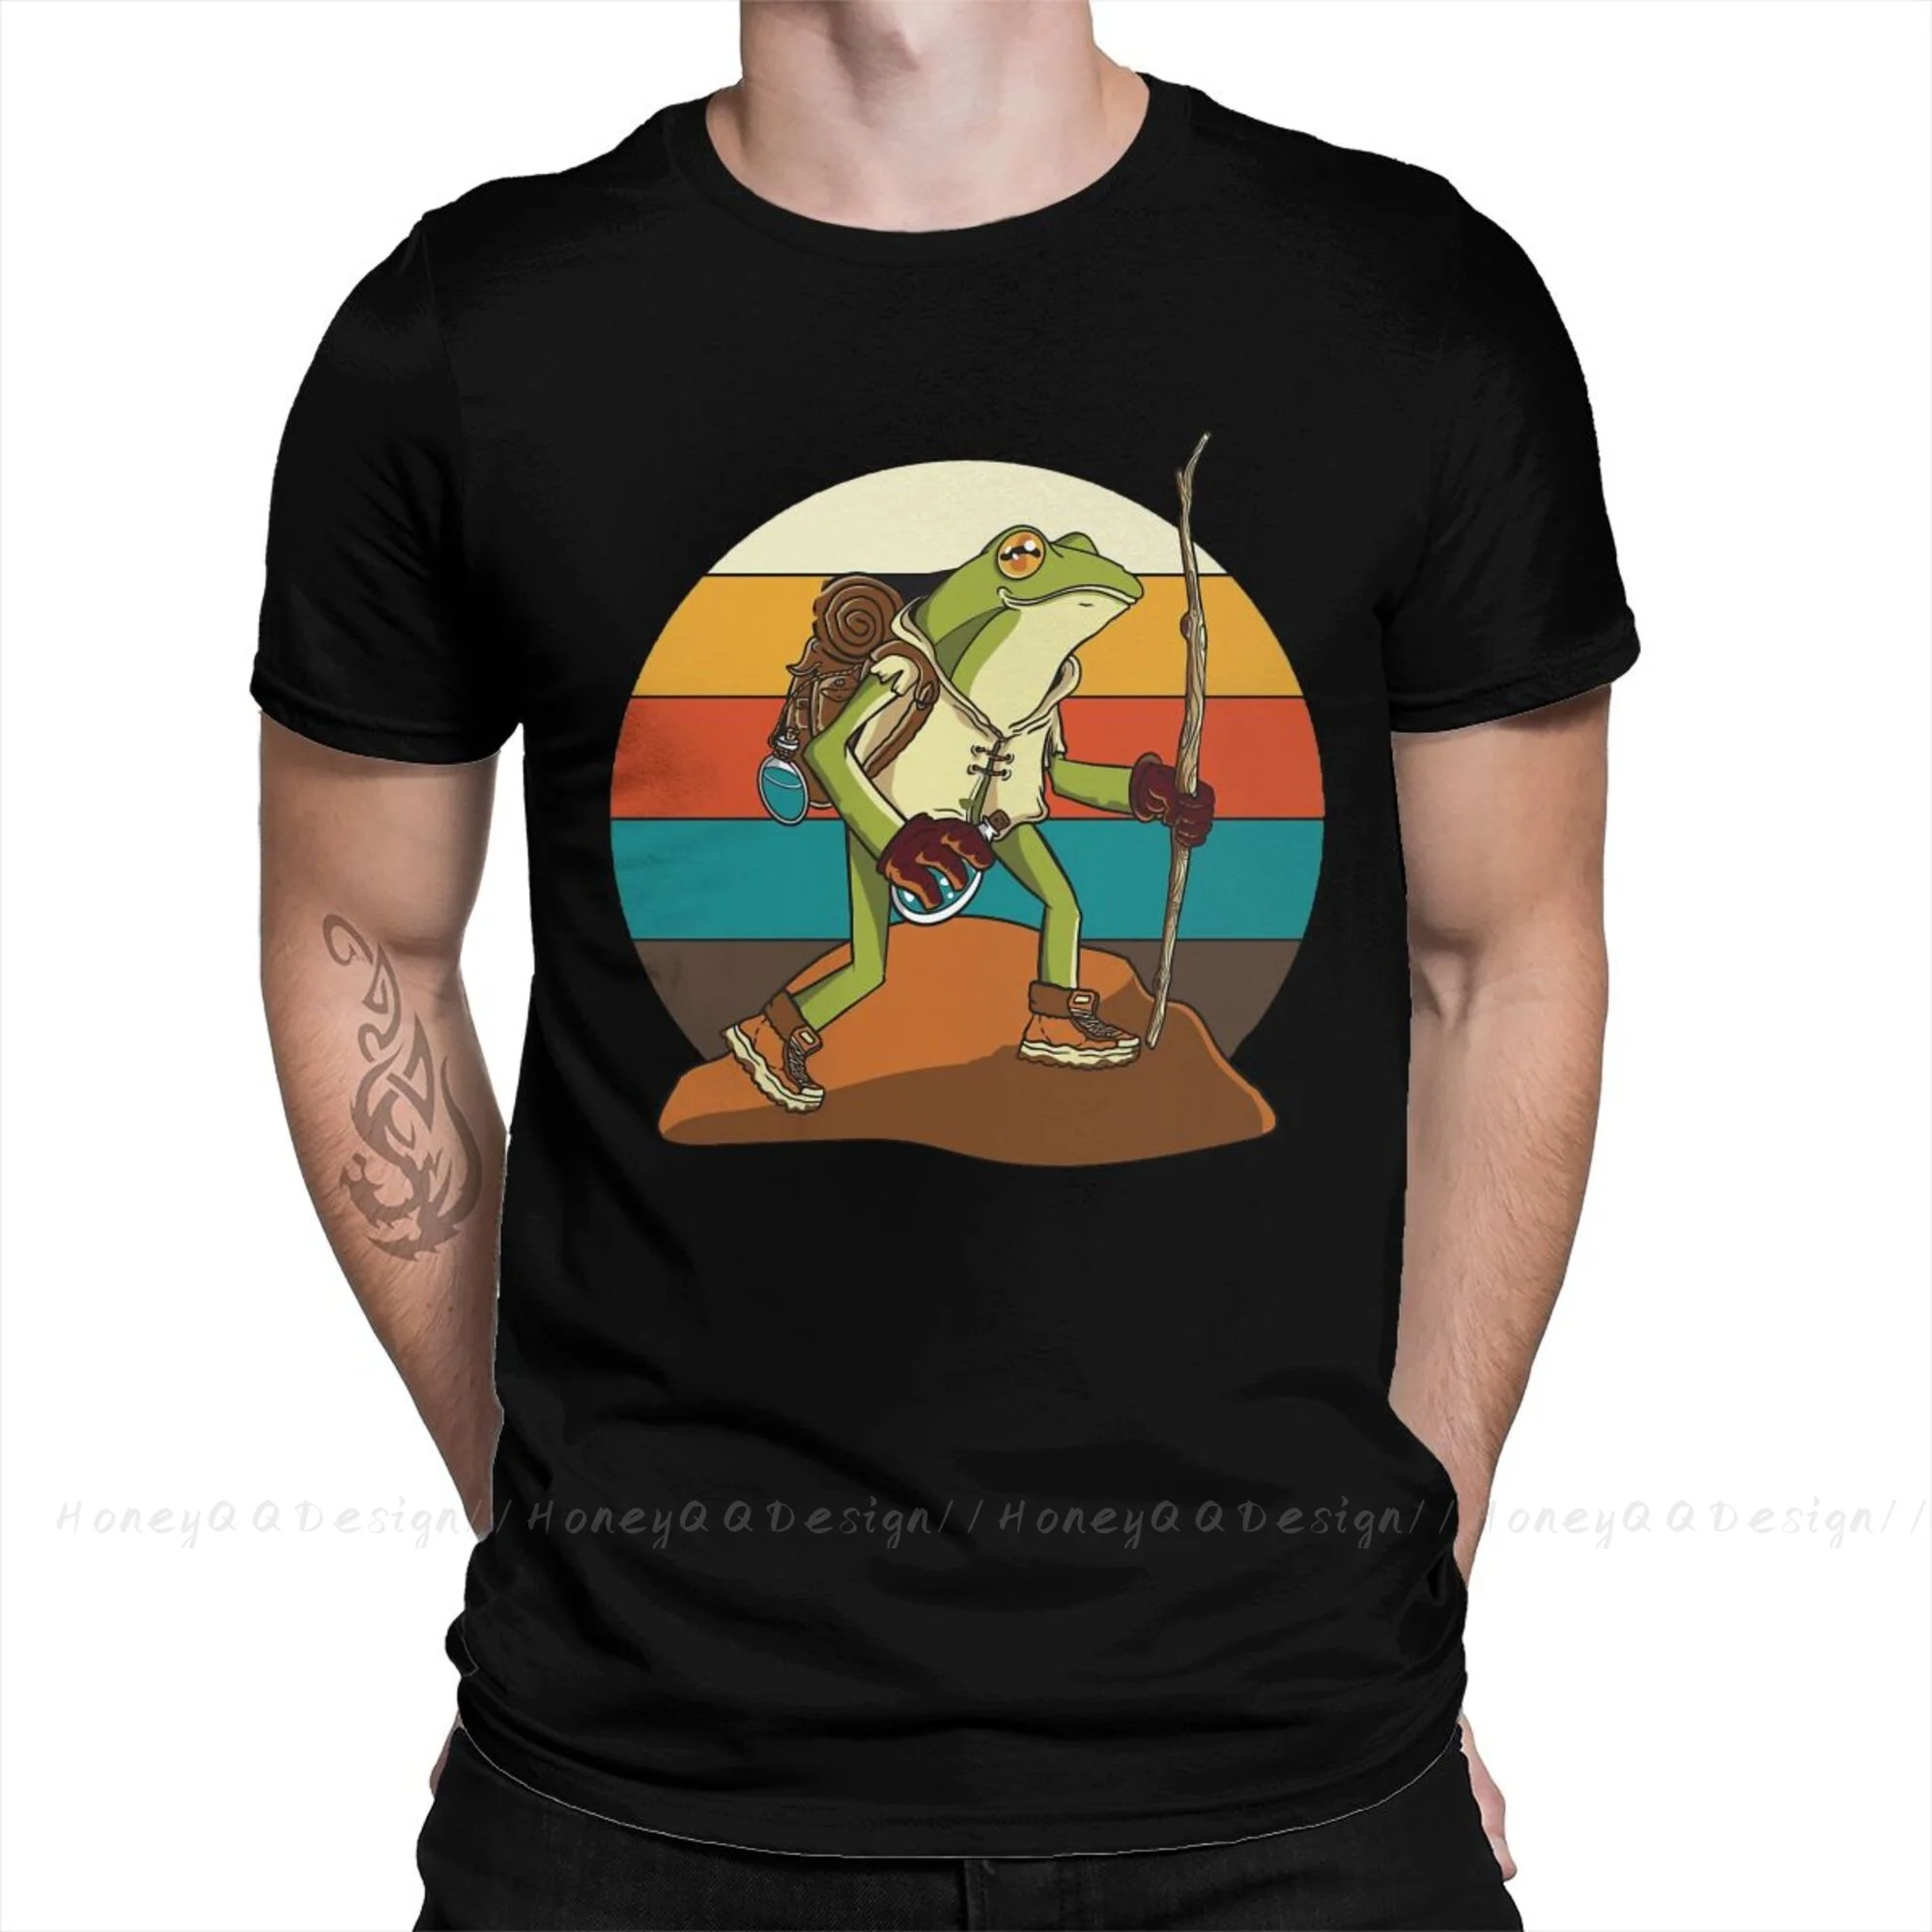 I Exist Without My Consent Frog Hiking-landscape-frog T-Shirt Men 100% Cotton Short Summer Sleeve Casual Plus Size Shirt Adults